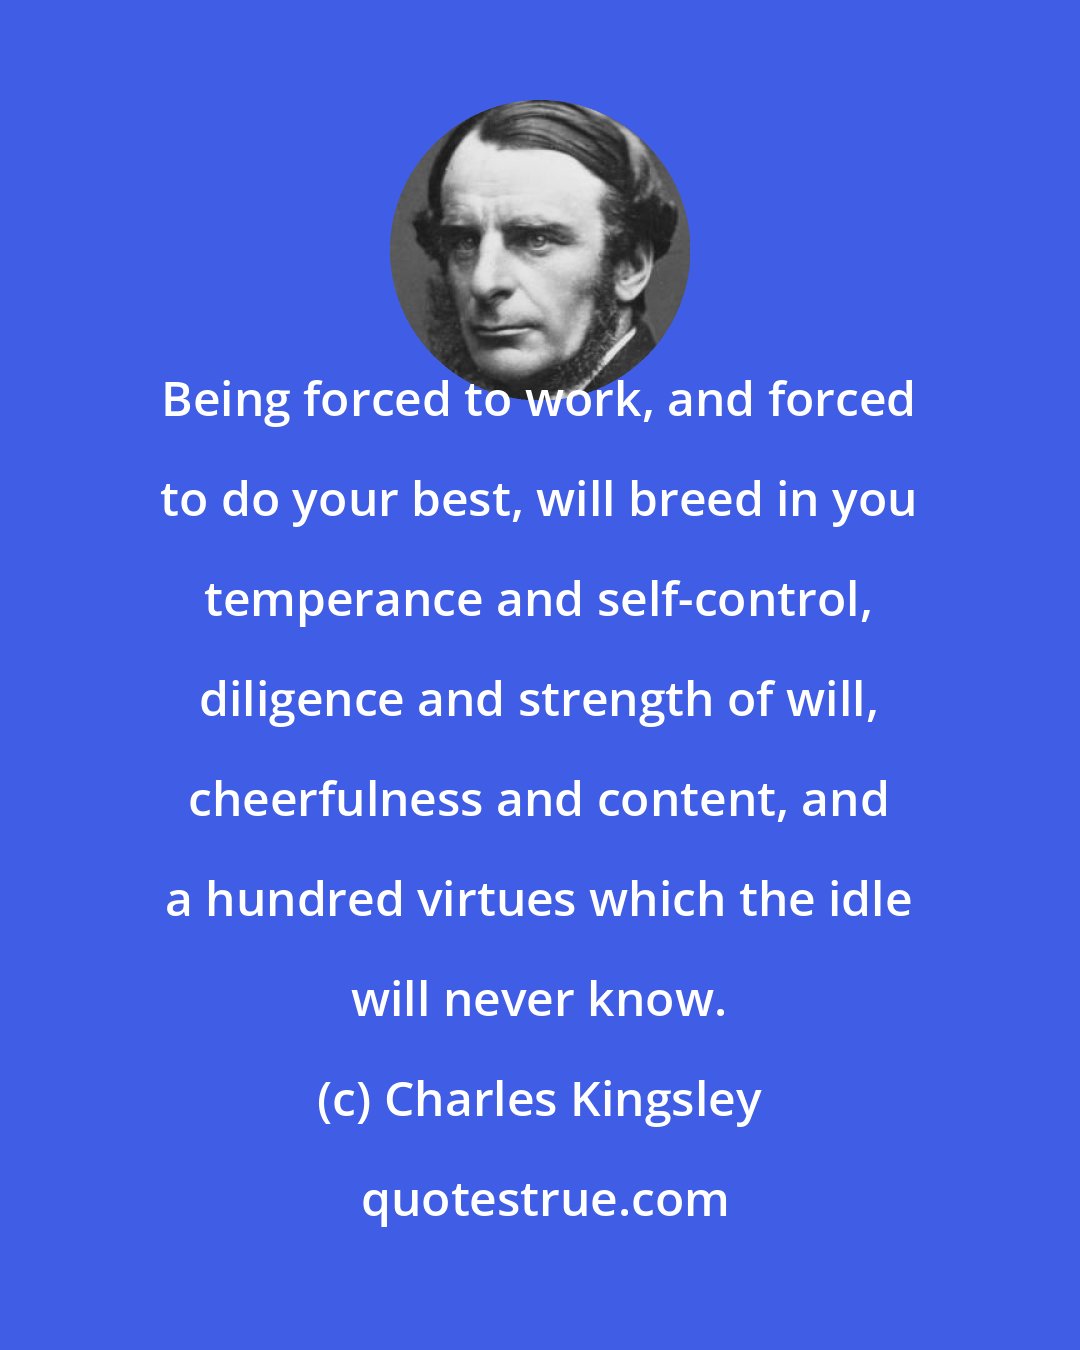 Charles Kingsley: Being forced to work, and forced to do your best, will breed in you temperance and self-control, diligence and strength of will, cheerfulness and content, and a hundred virtues which the idle will never know.